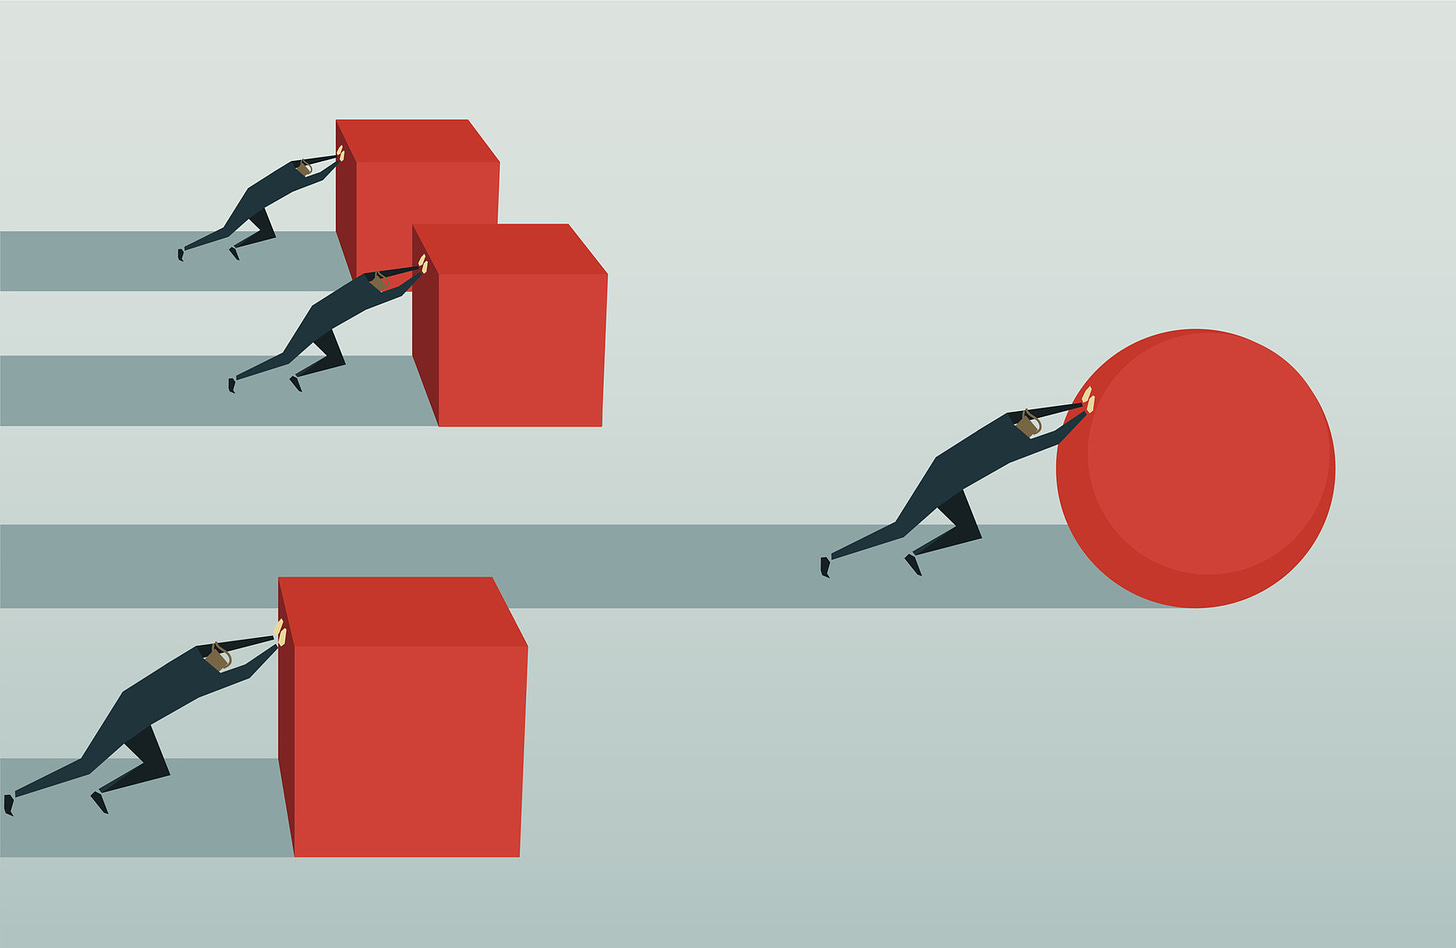 How to Prolong Competitive Advantage | INSEAD Knowledge